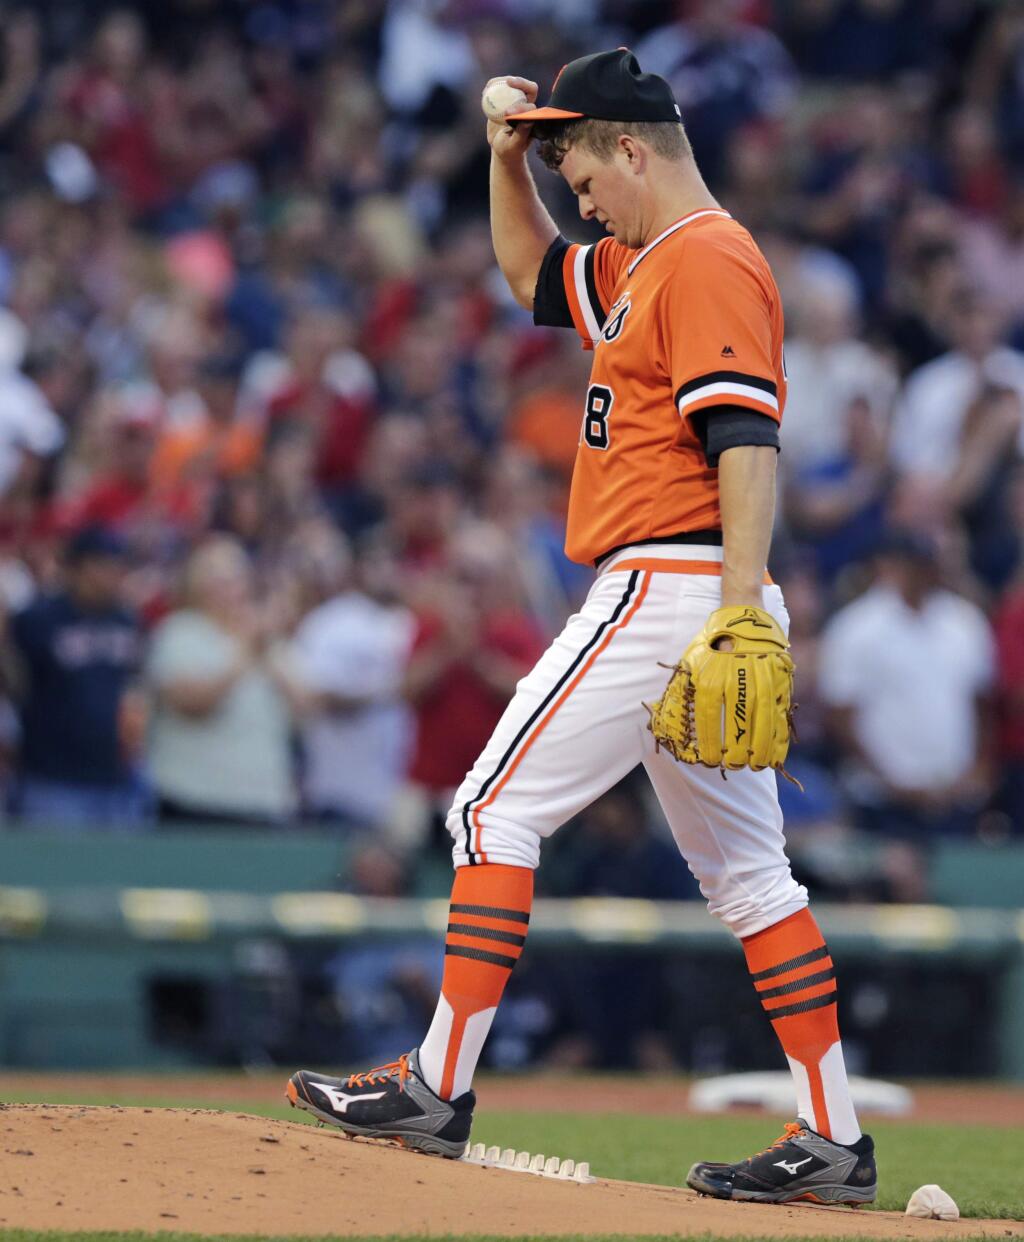 San Francisco Giants starting pitcher Matt Cain tugs on his cap as he walks back to the mound with a fresh baseball after giving up a home run to Boston Red Sox's Travis Shaw during second inning of a baseball game at Fenway Park, Wednesday, July 20, 2016, in Boston. (AP Photo/Charles Krupa)